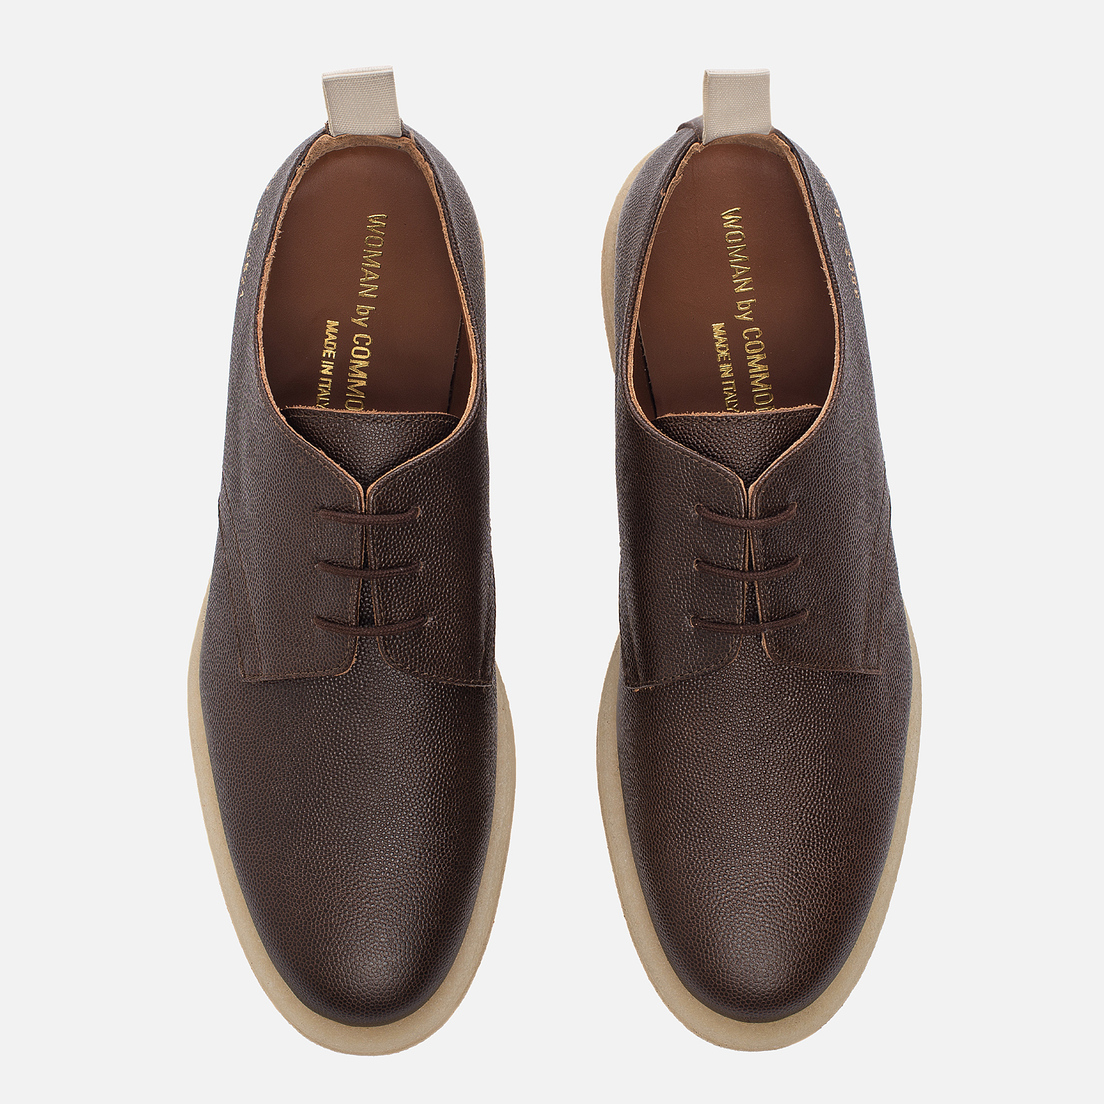 Common Projects Женские ботинки Cadet Derby 3802